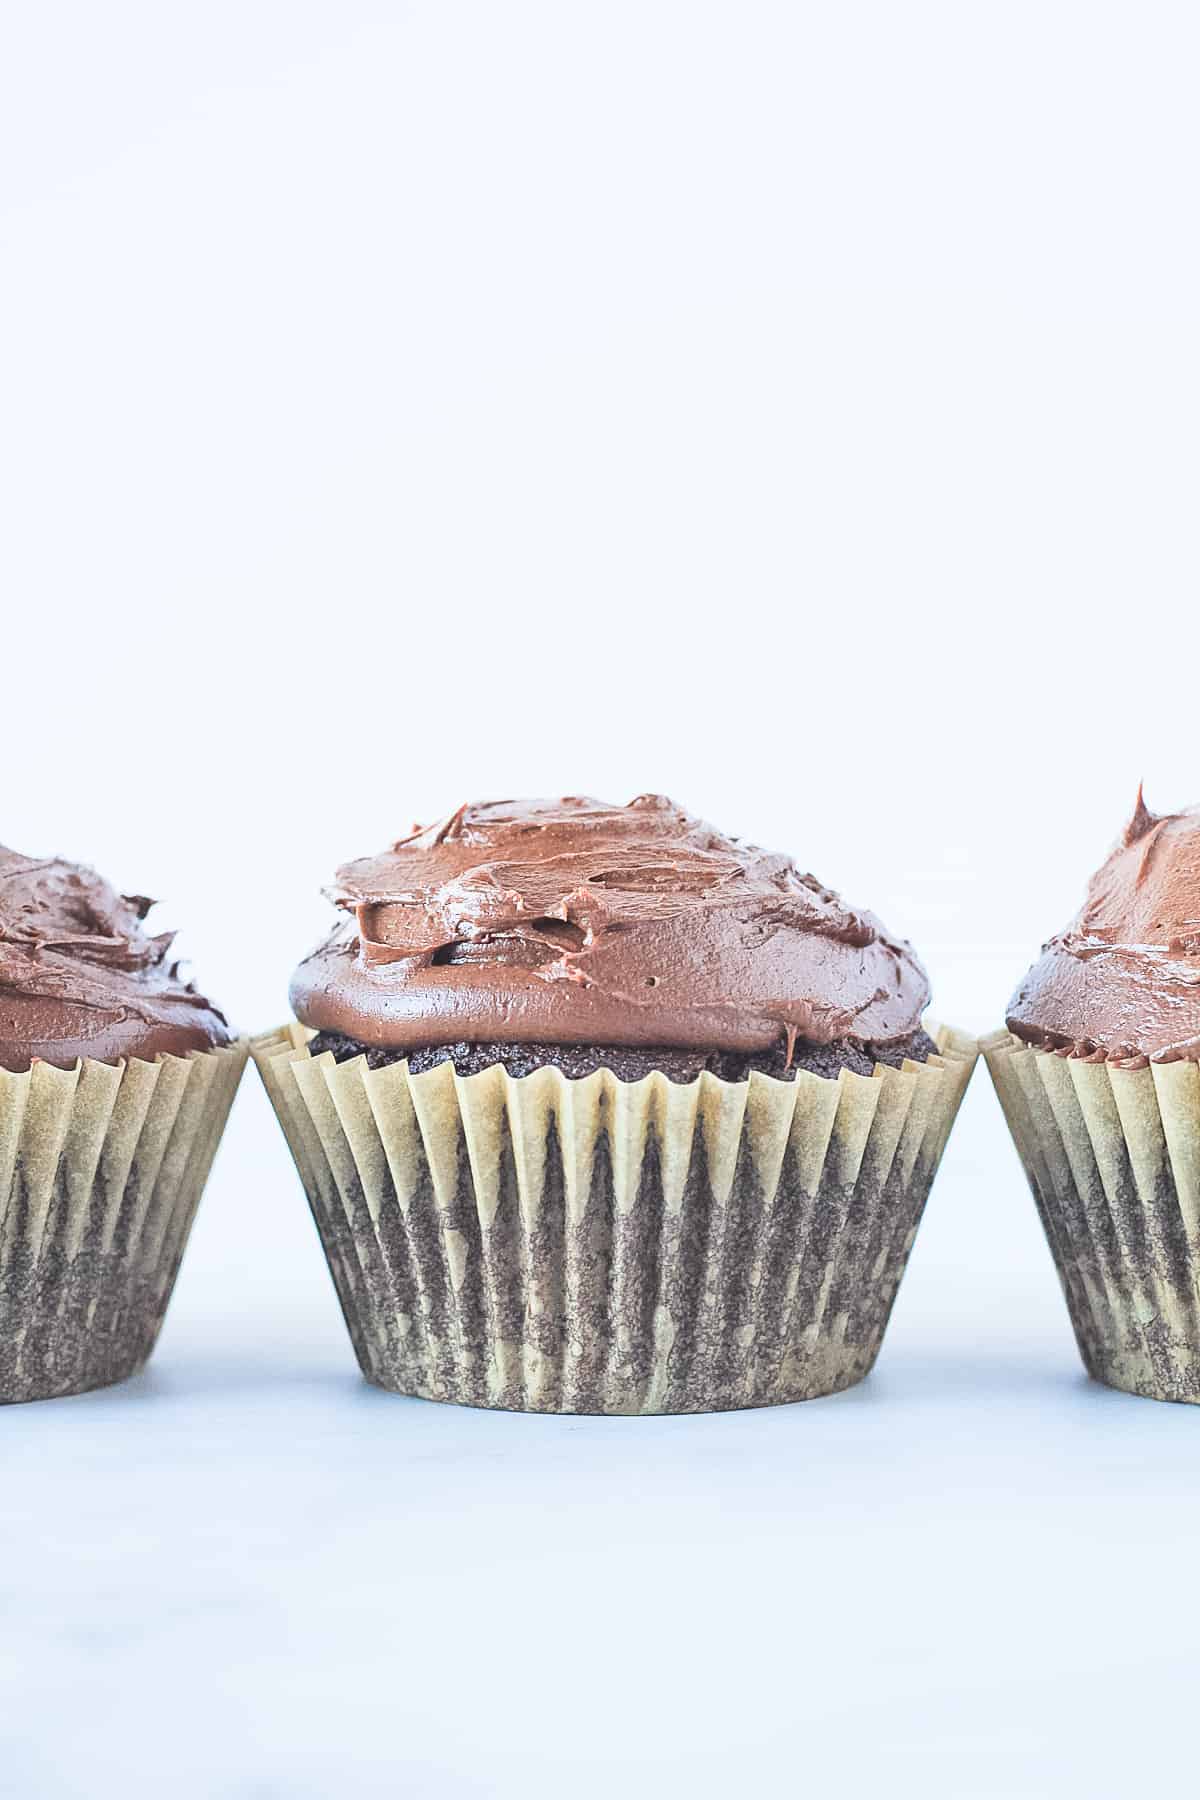 Three vegan chocolate cupcakes in a row topped with chocolate frosting.